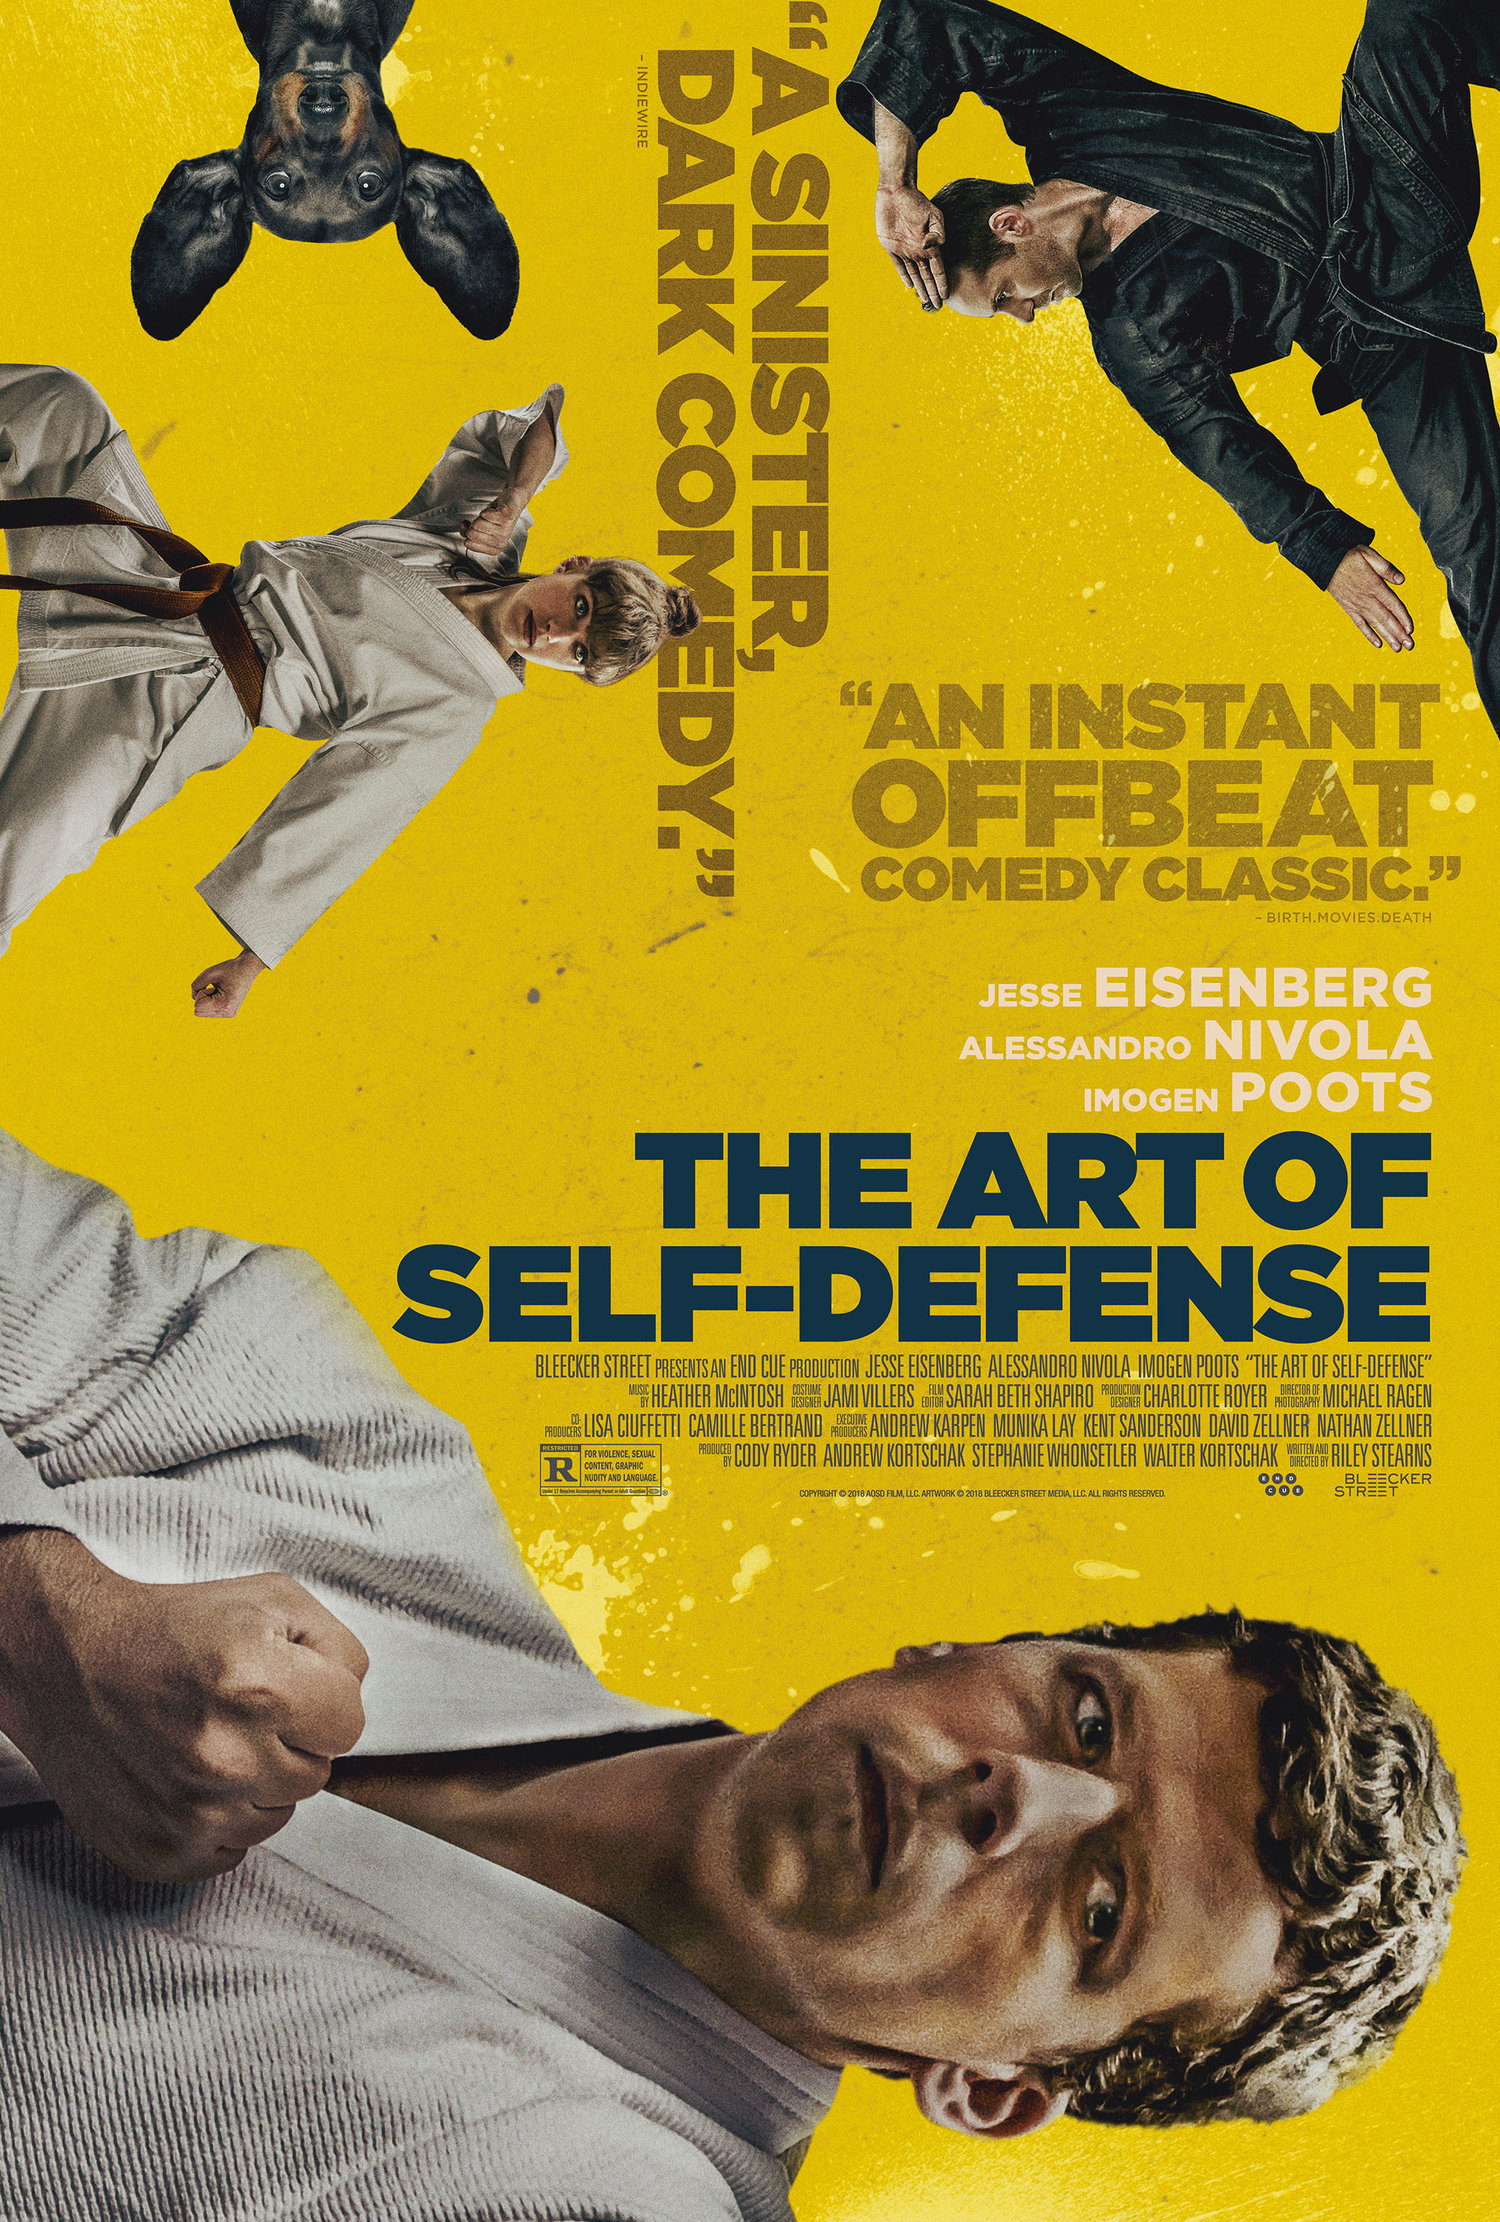 "The Art of Self-Defense" Review: A Profound Dissection of Masculinity